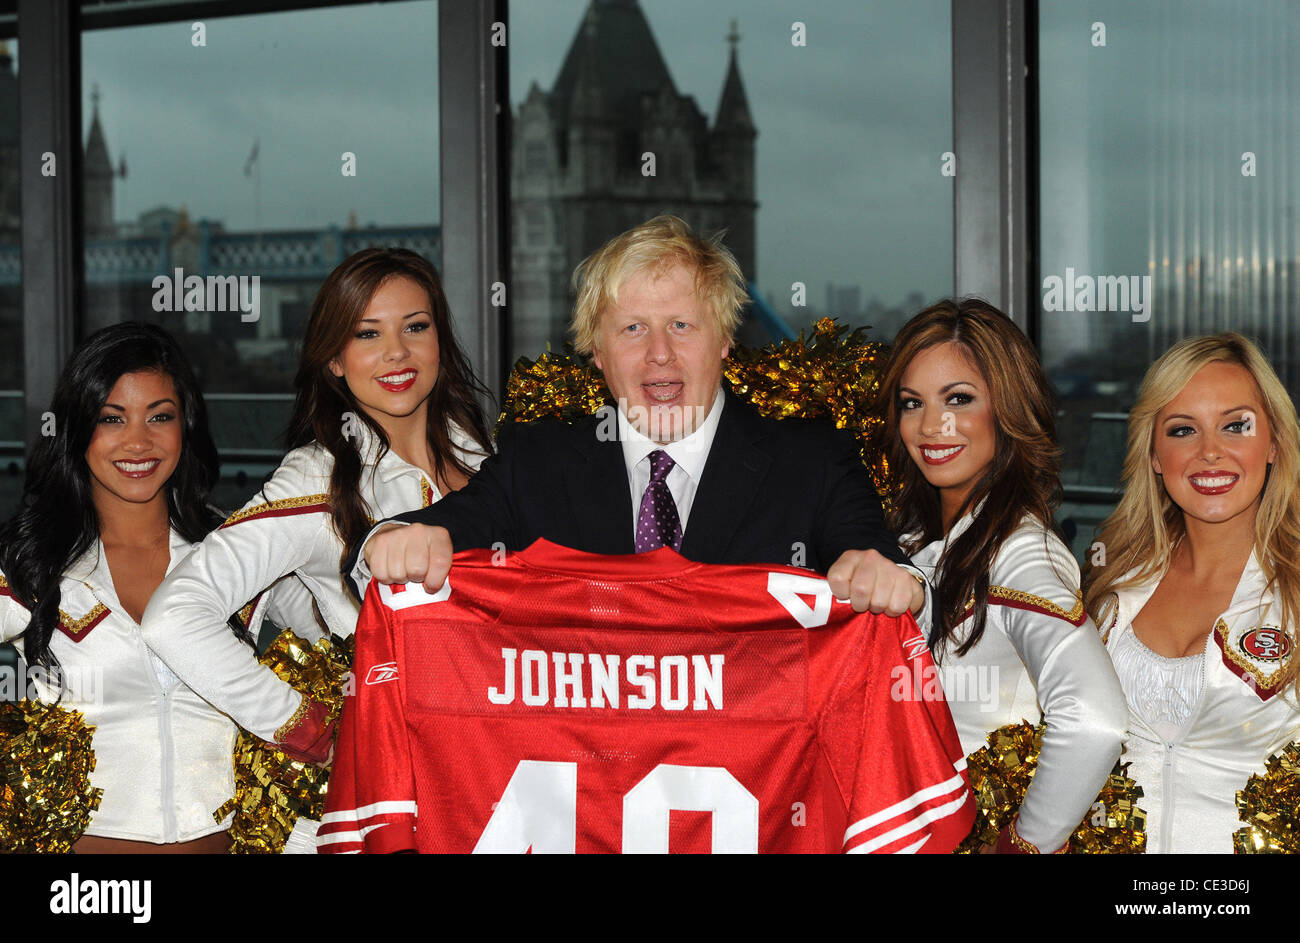 Mayor Boris Johnson San Francisco 49ers - photocall held at Potters Field Park. London Mayor meets members of the five-times SuperBowl champions ahead of their game against the Denver Broncos at Wembley Arena on the 31st of October. London, England - 26.1 Stock Photo